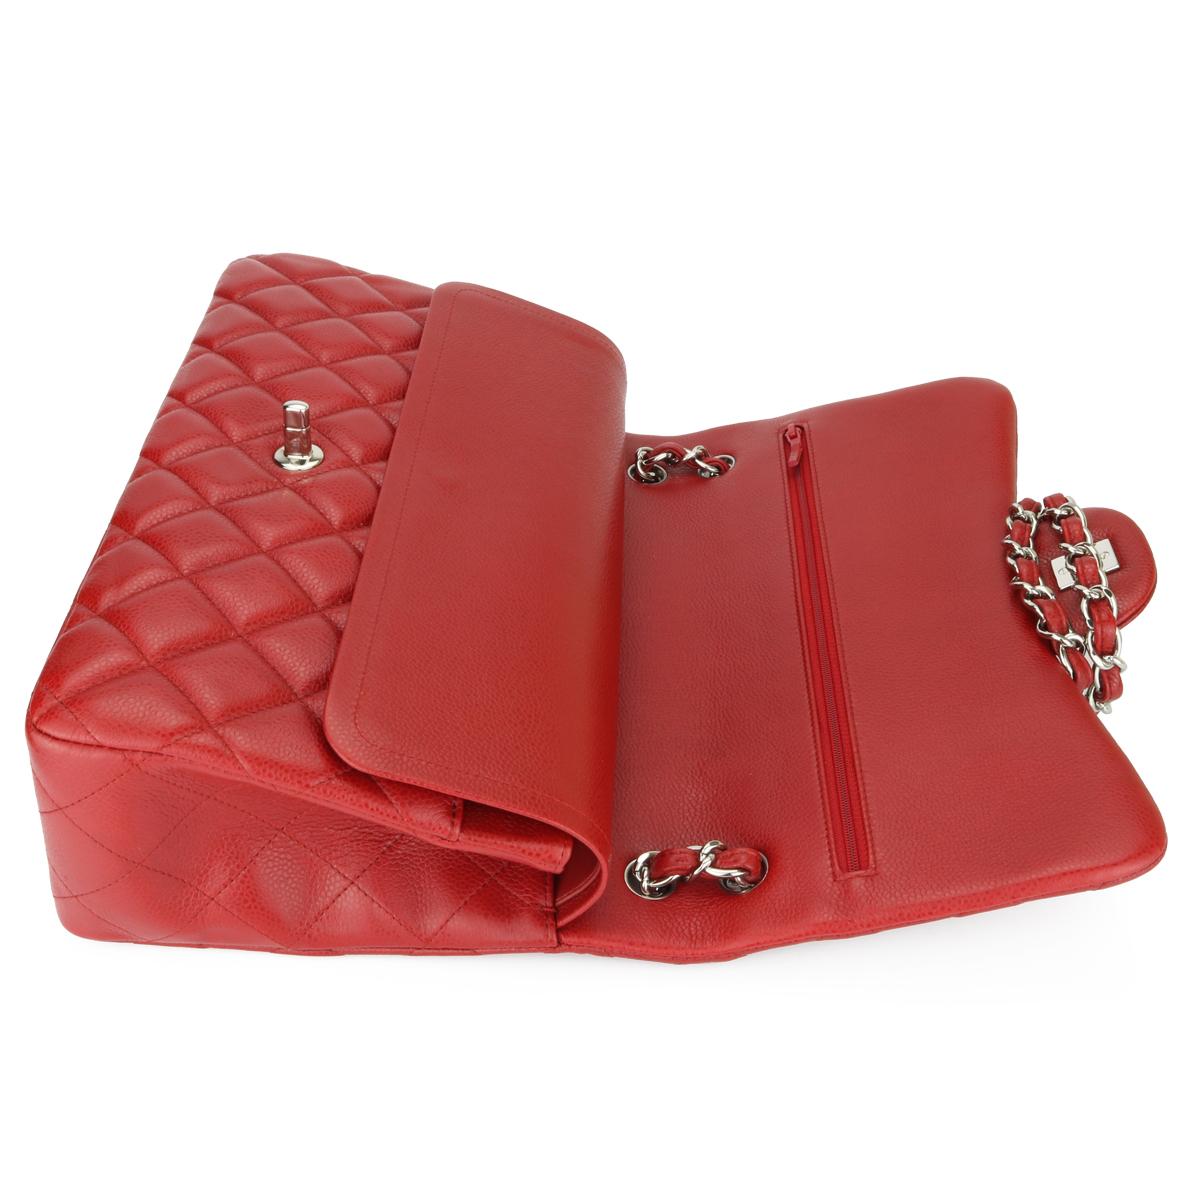 CHANEL Double Flap Jumbo Bag Red Caviar with Silver Hardware 2010 6